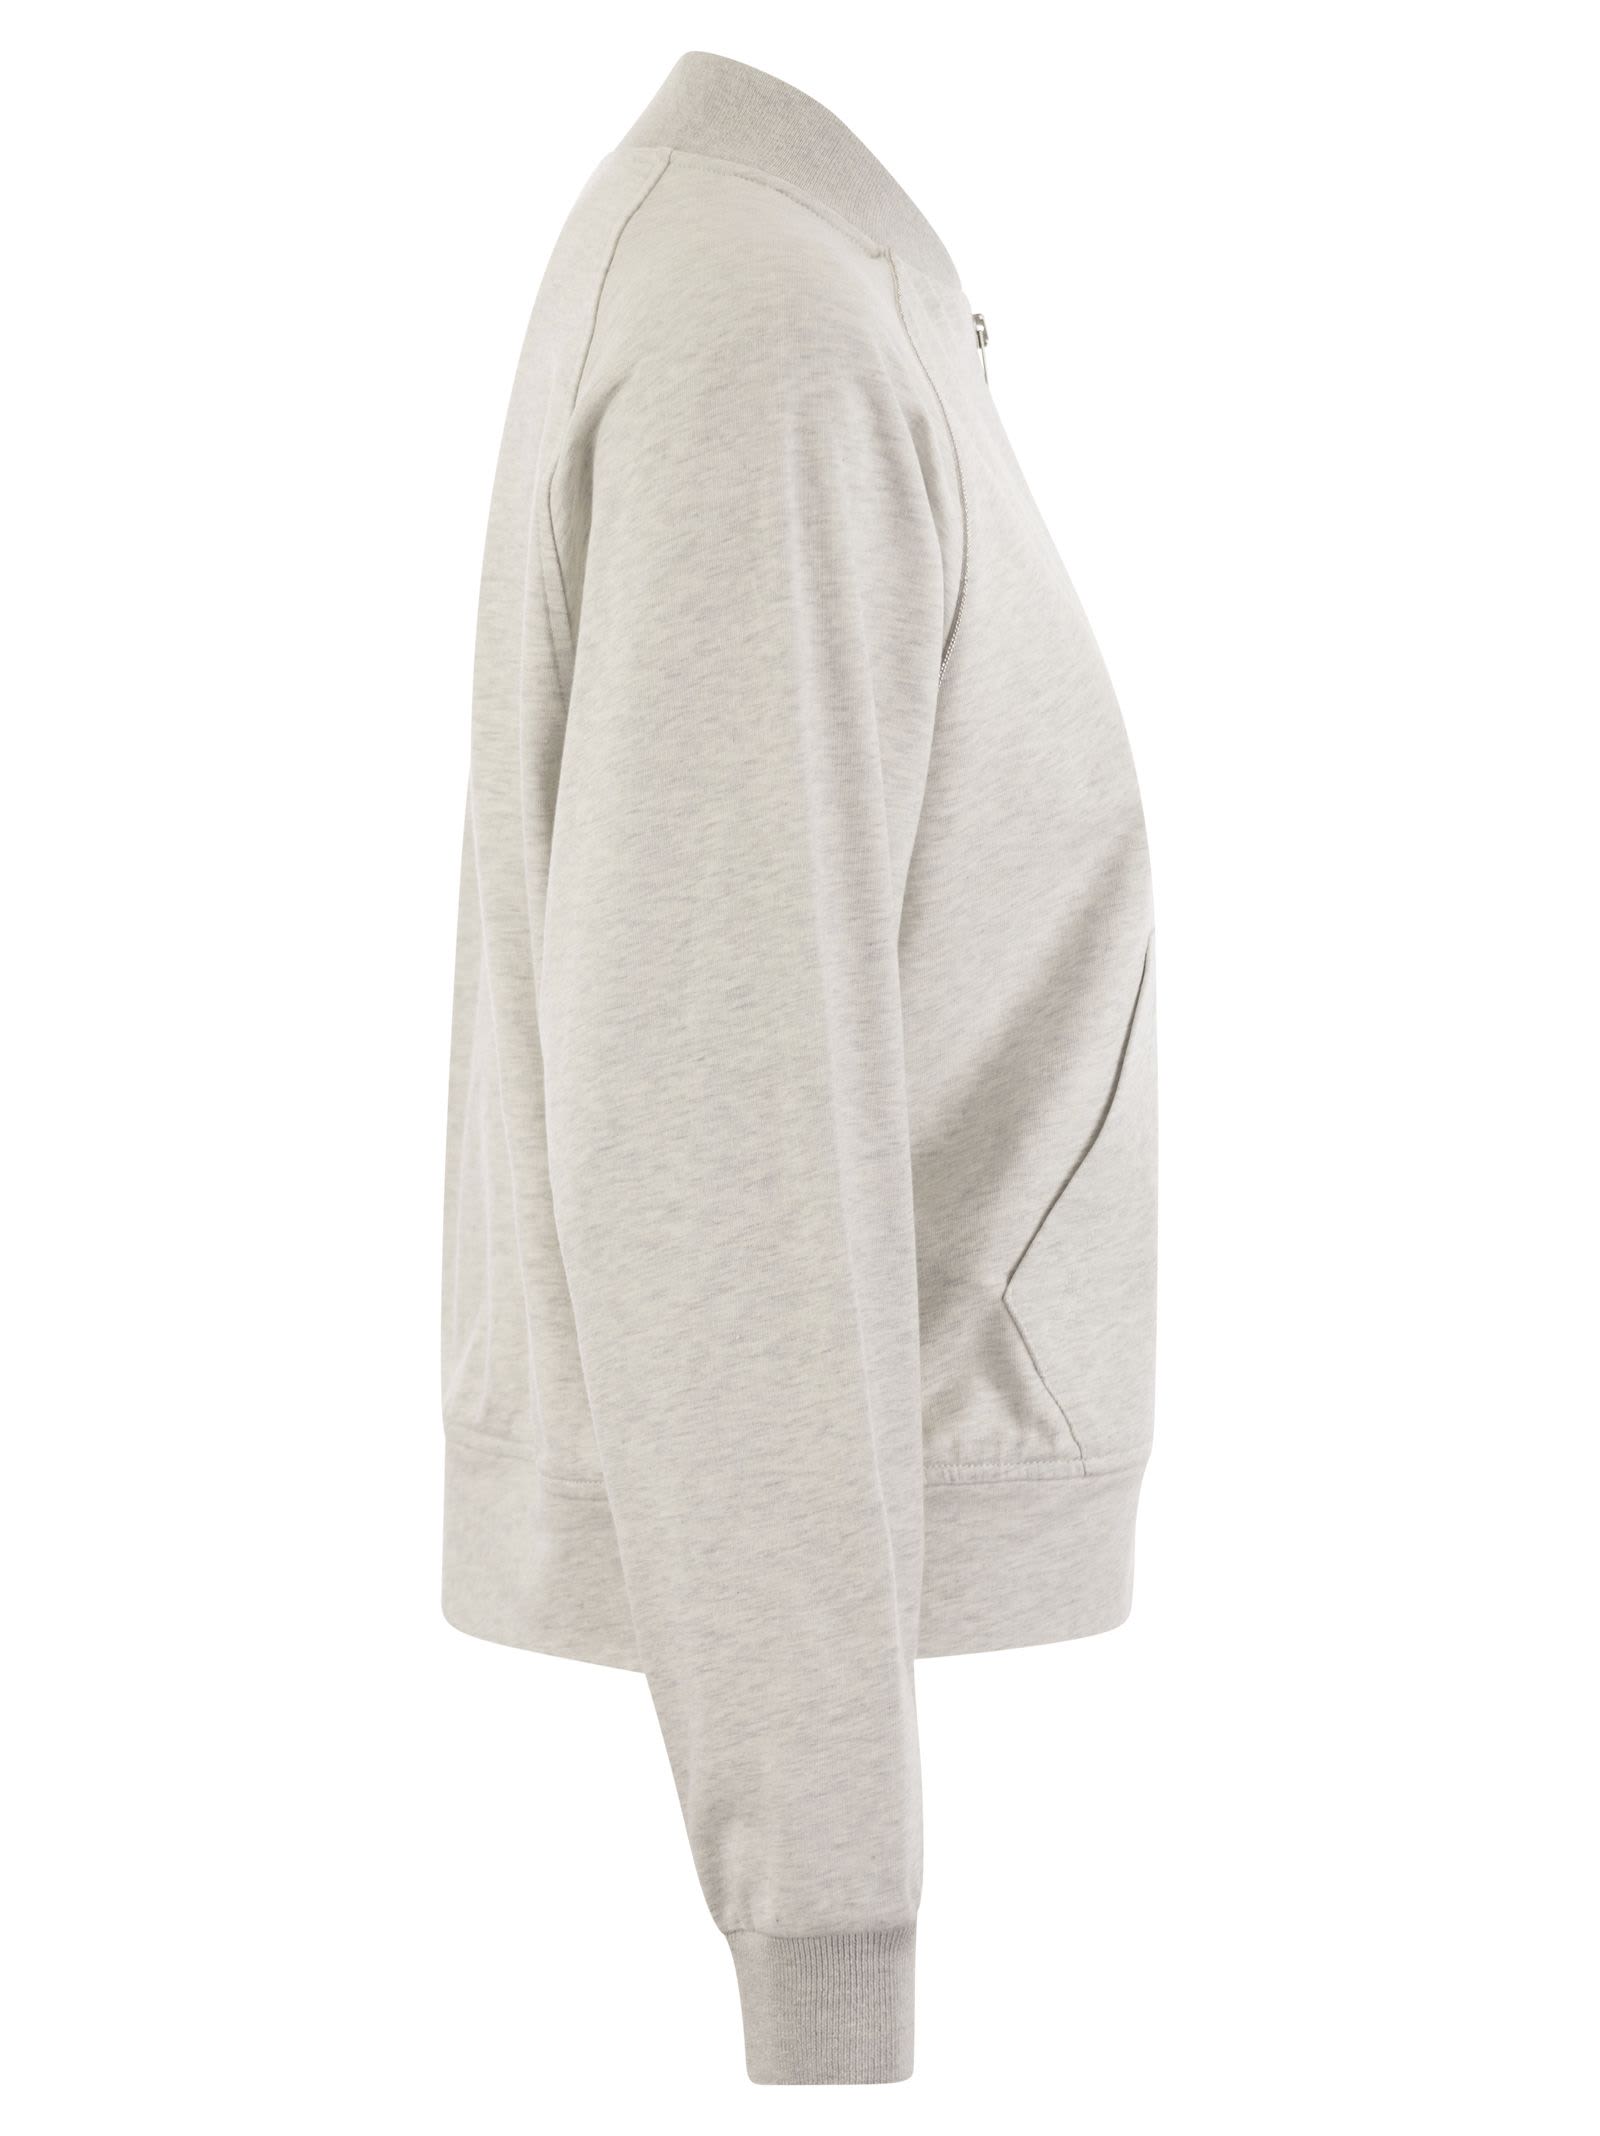 Shop Peserico Sweatshirt In Cotton Mélange And Tricot Details In Grey